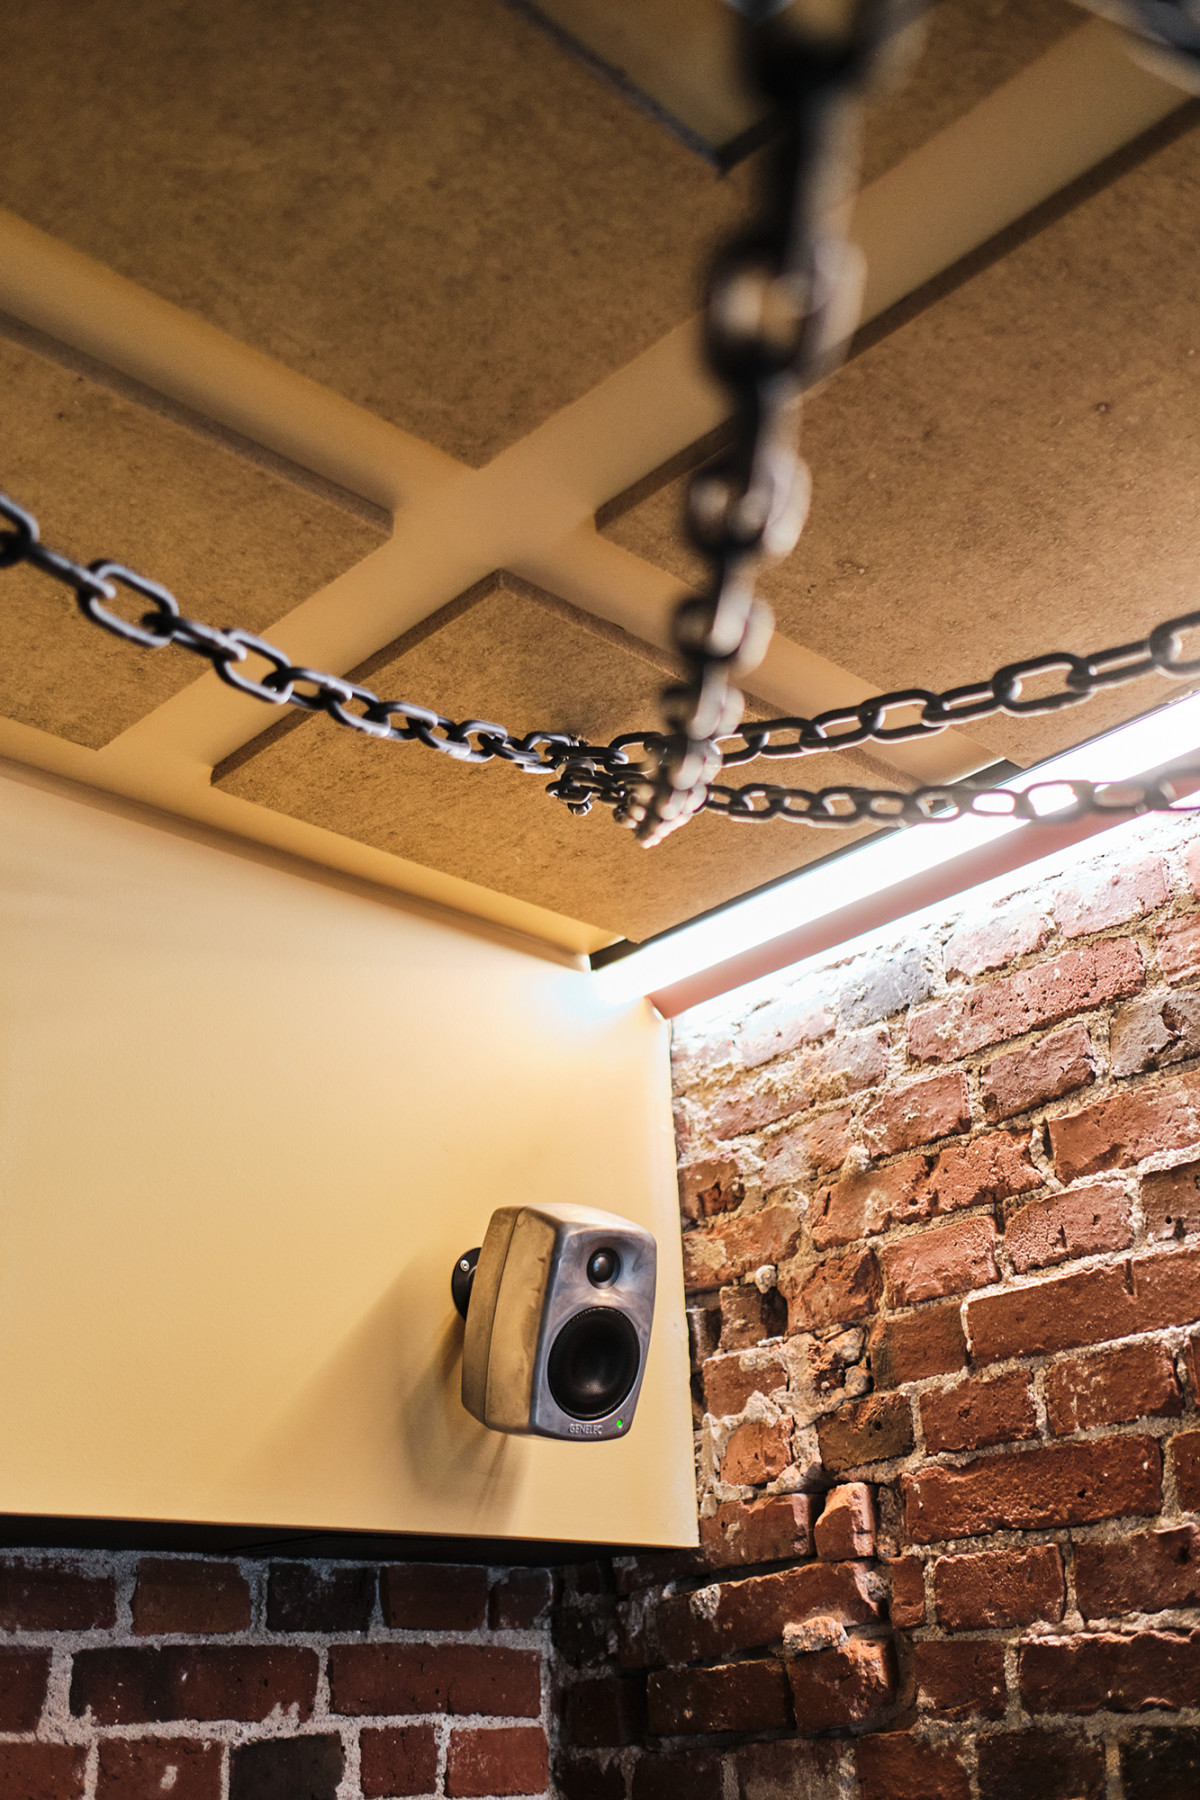 Genelec delivers a RAW experience behind bars in former prison-turned-hotel.